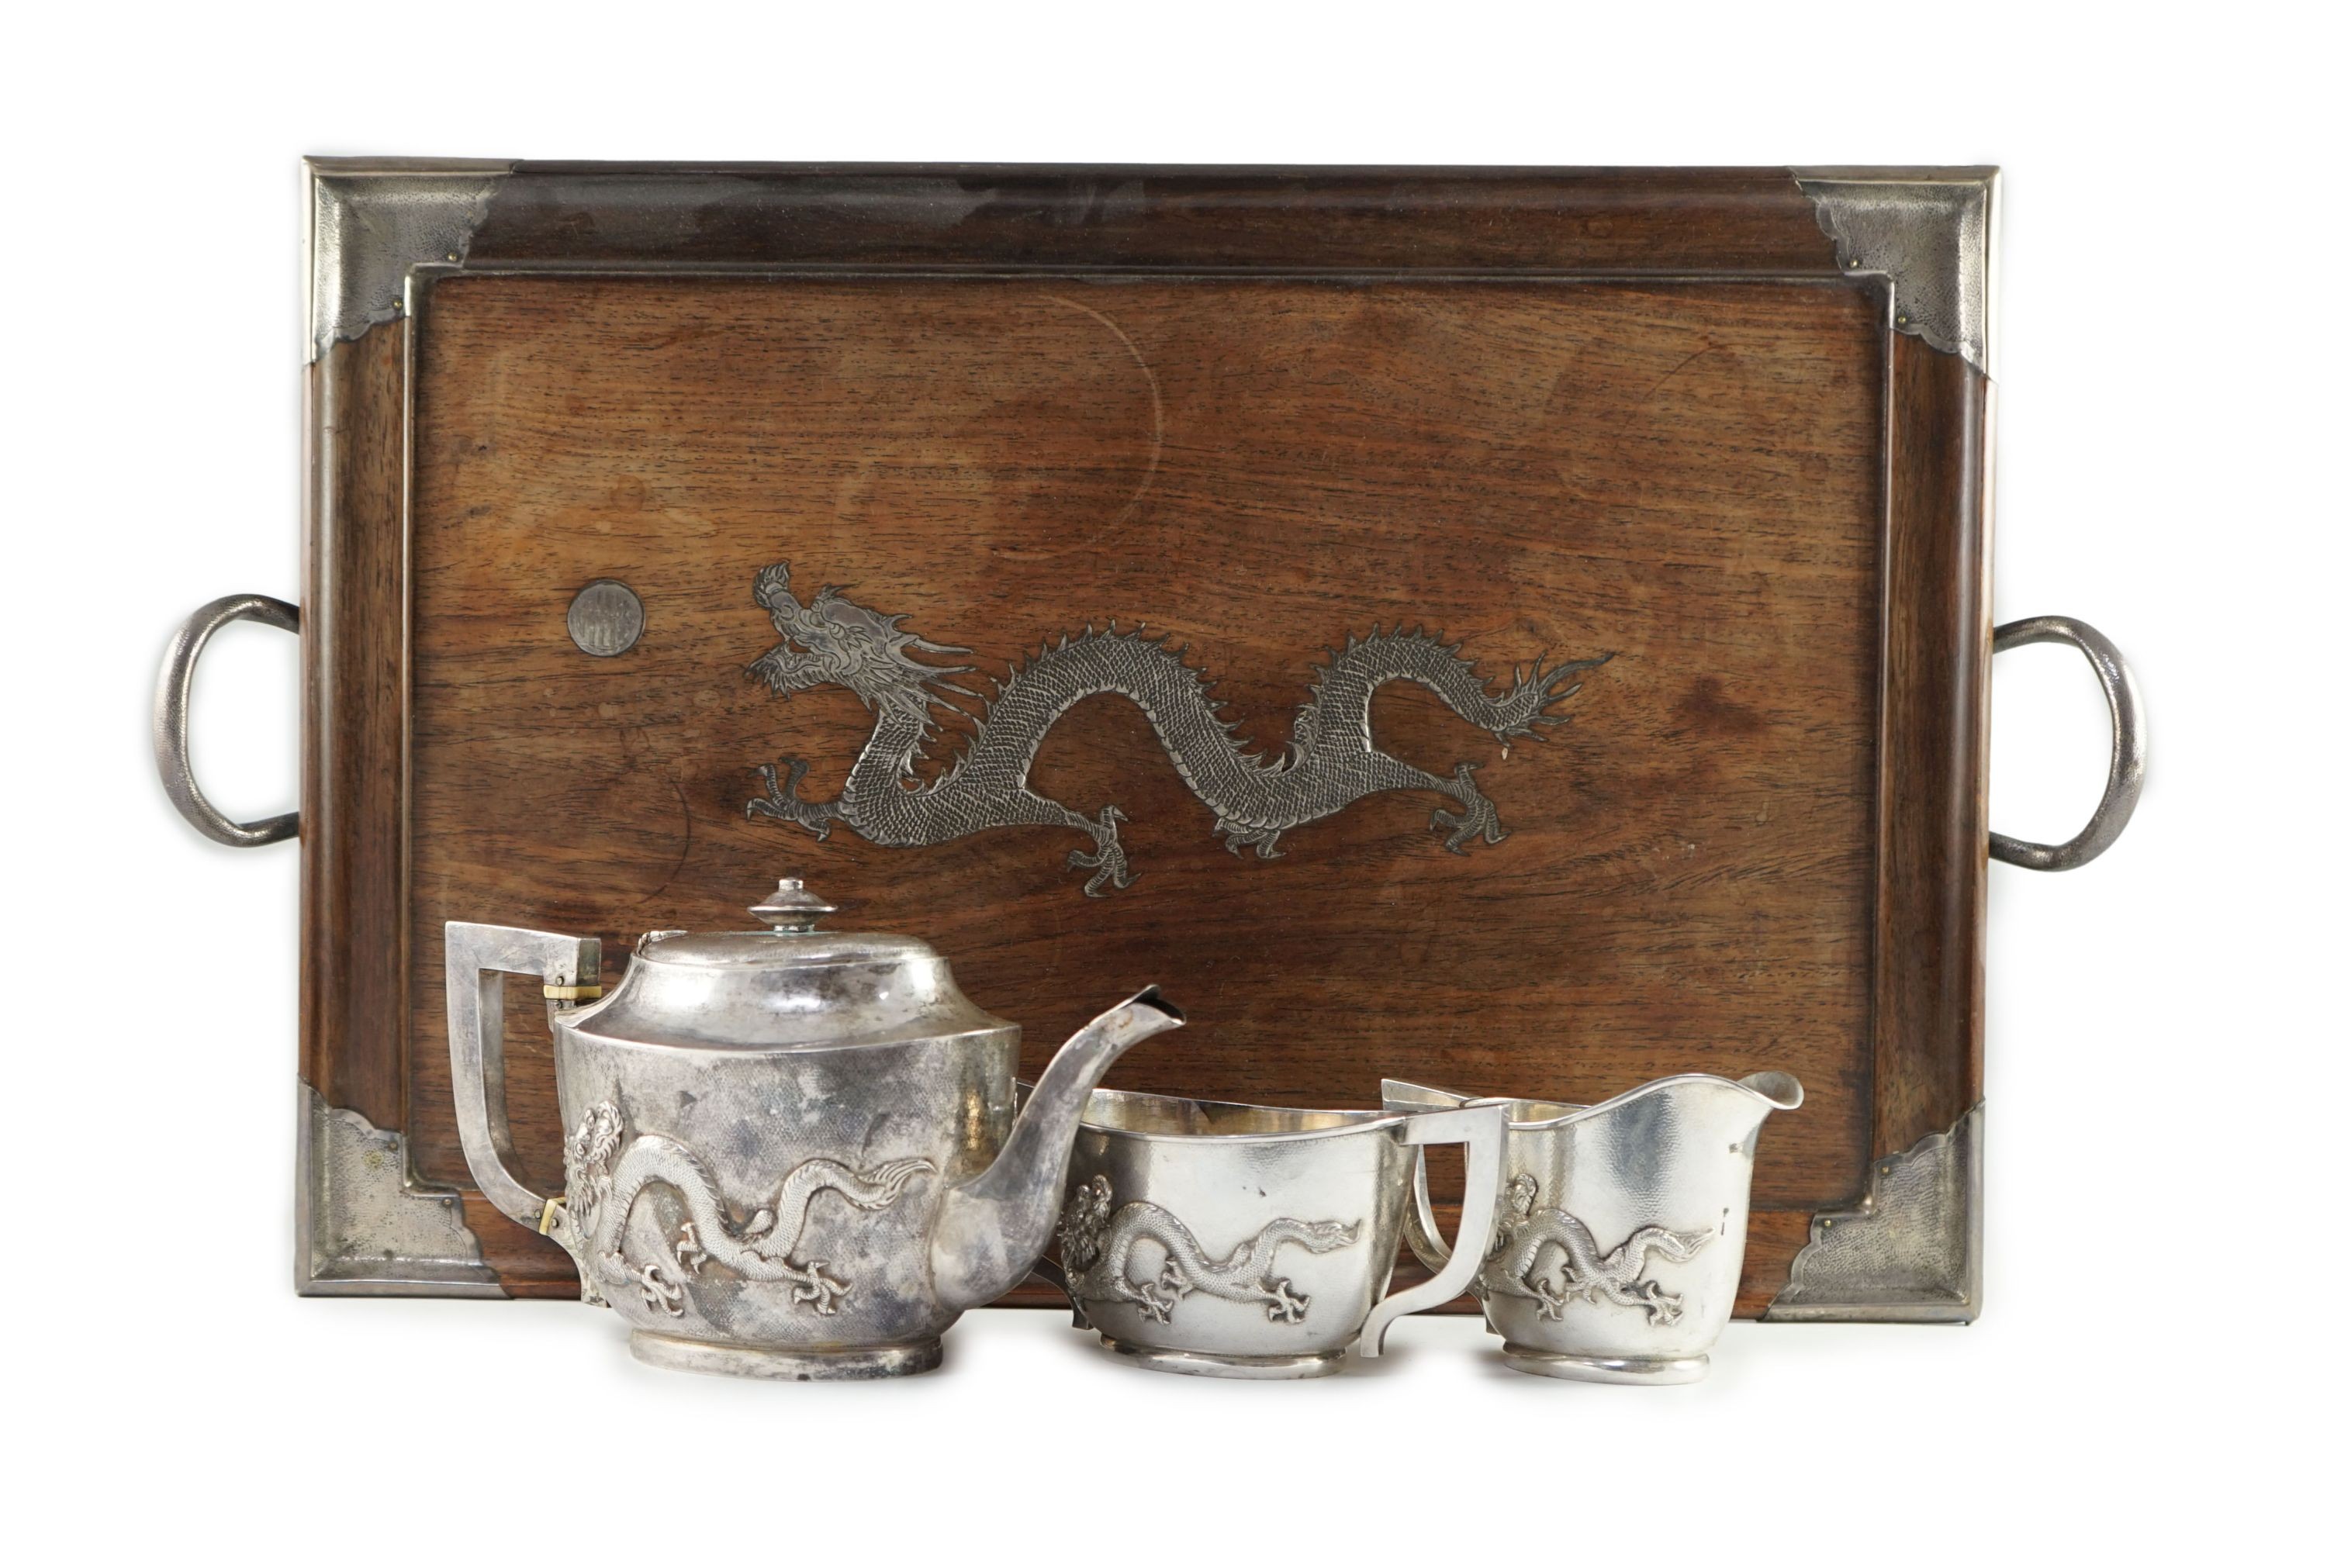 An early 20th century Chinese Export three piece silver tea set and matching silver inlaid hardwood two handled tea tray, by Luen Hing?